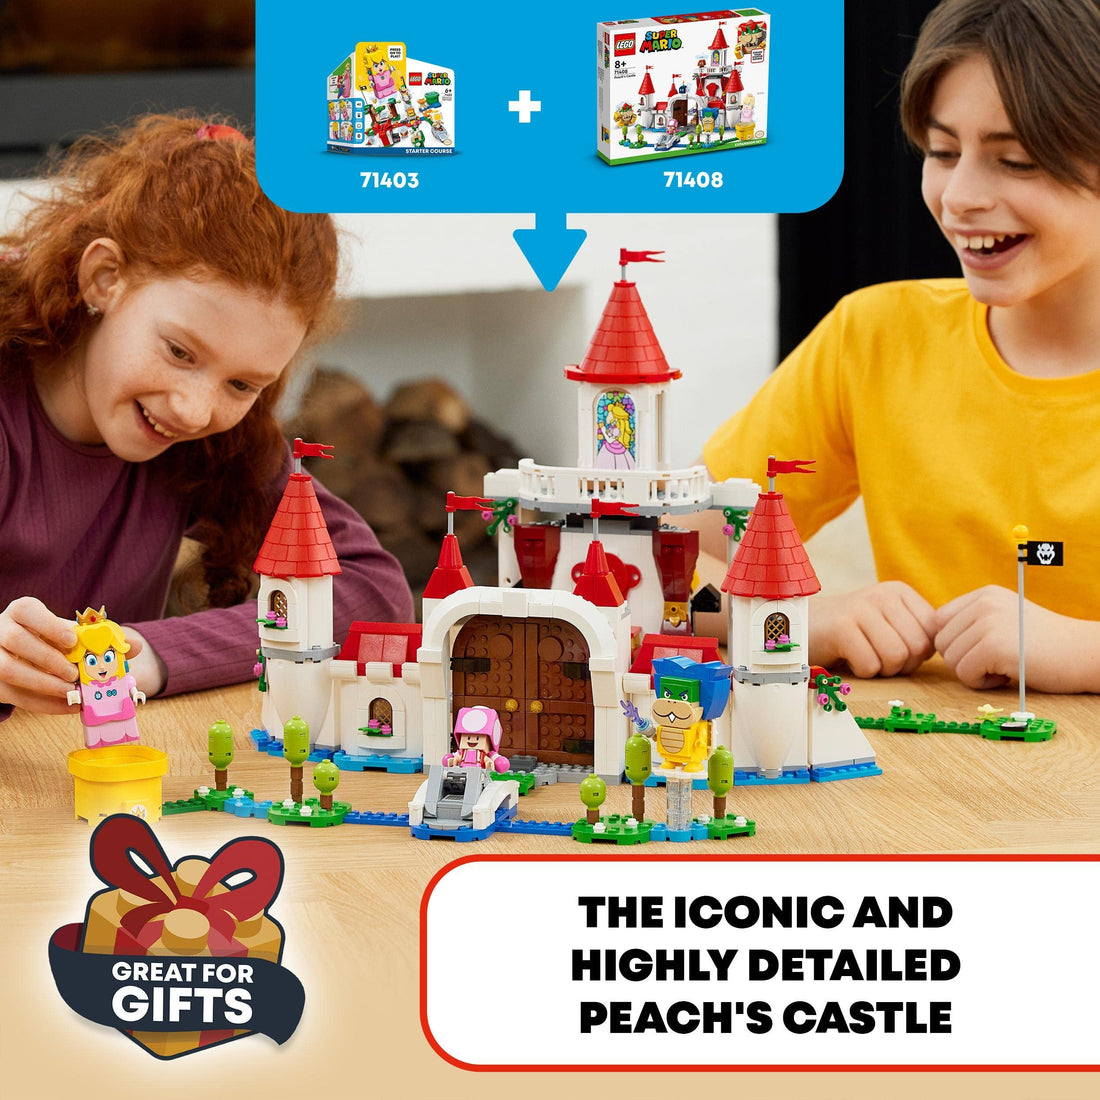 LEGO 71408 Super Mario Peach’s Castle Expansion Set, Buildable Game Toy, for Kids with Time Block plus Figures, to Combine with Starter Course